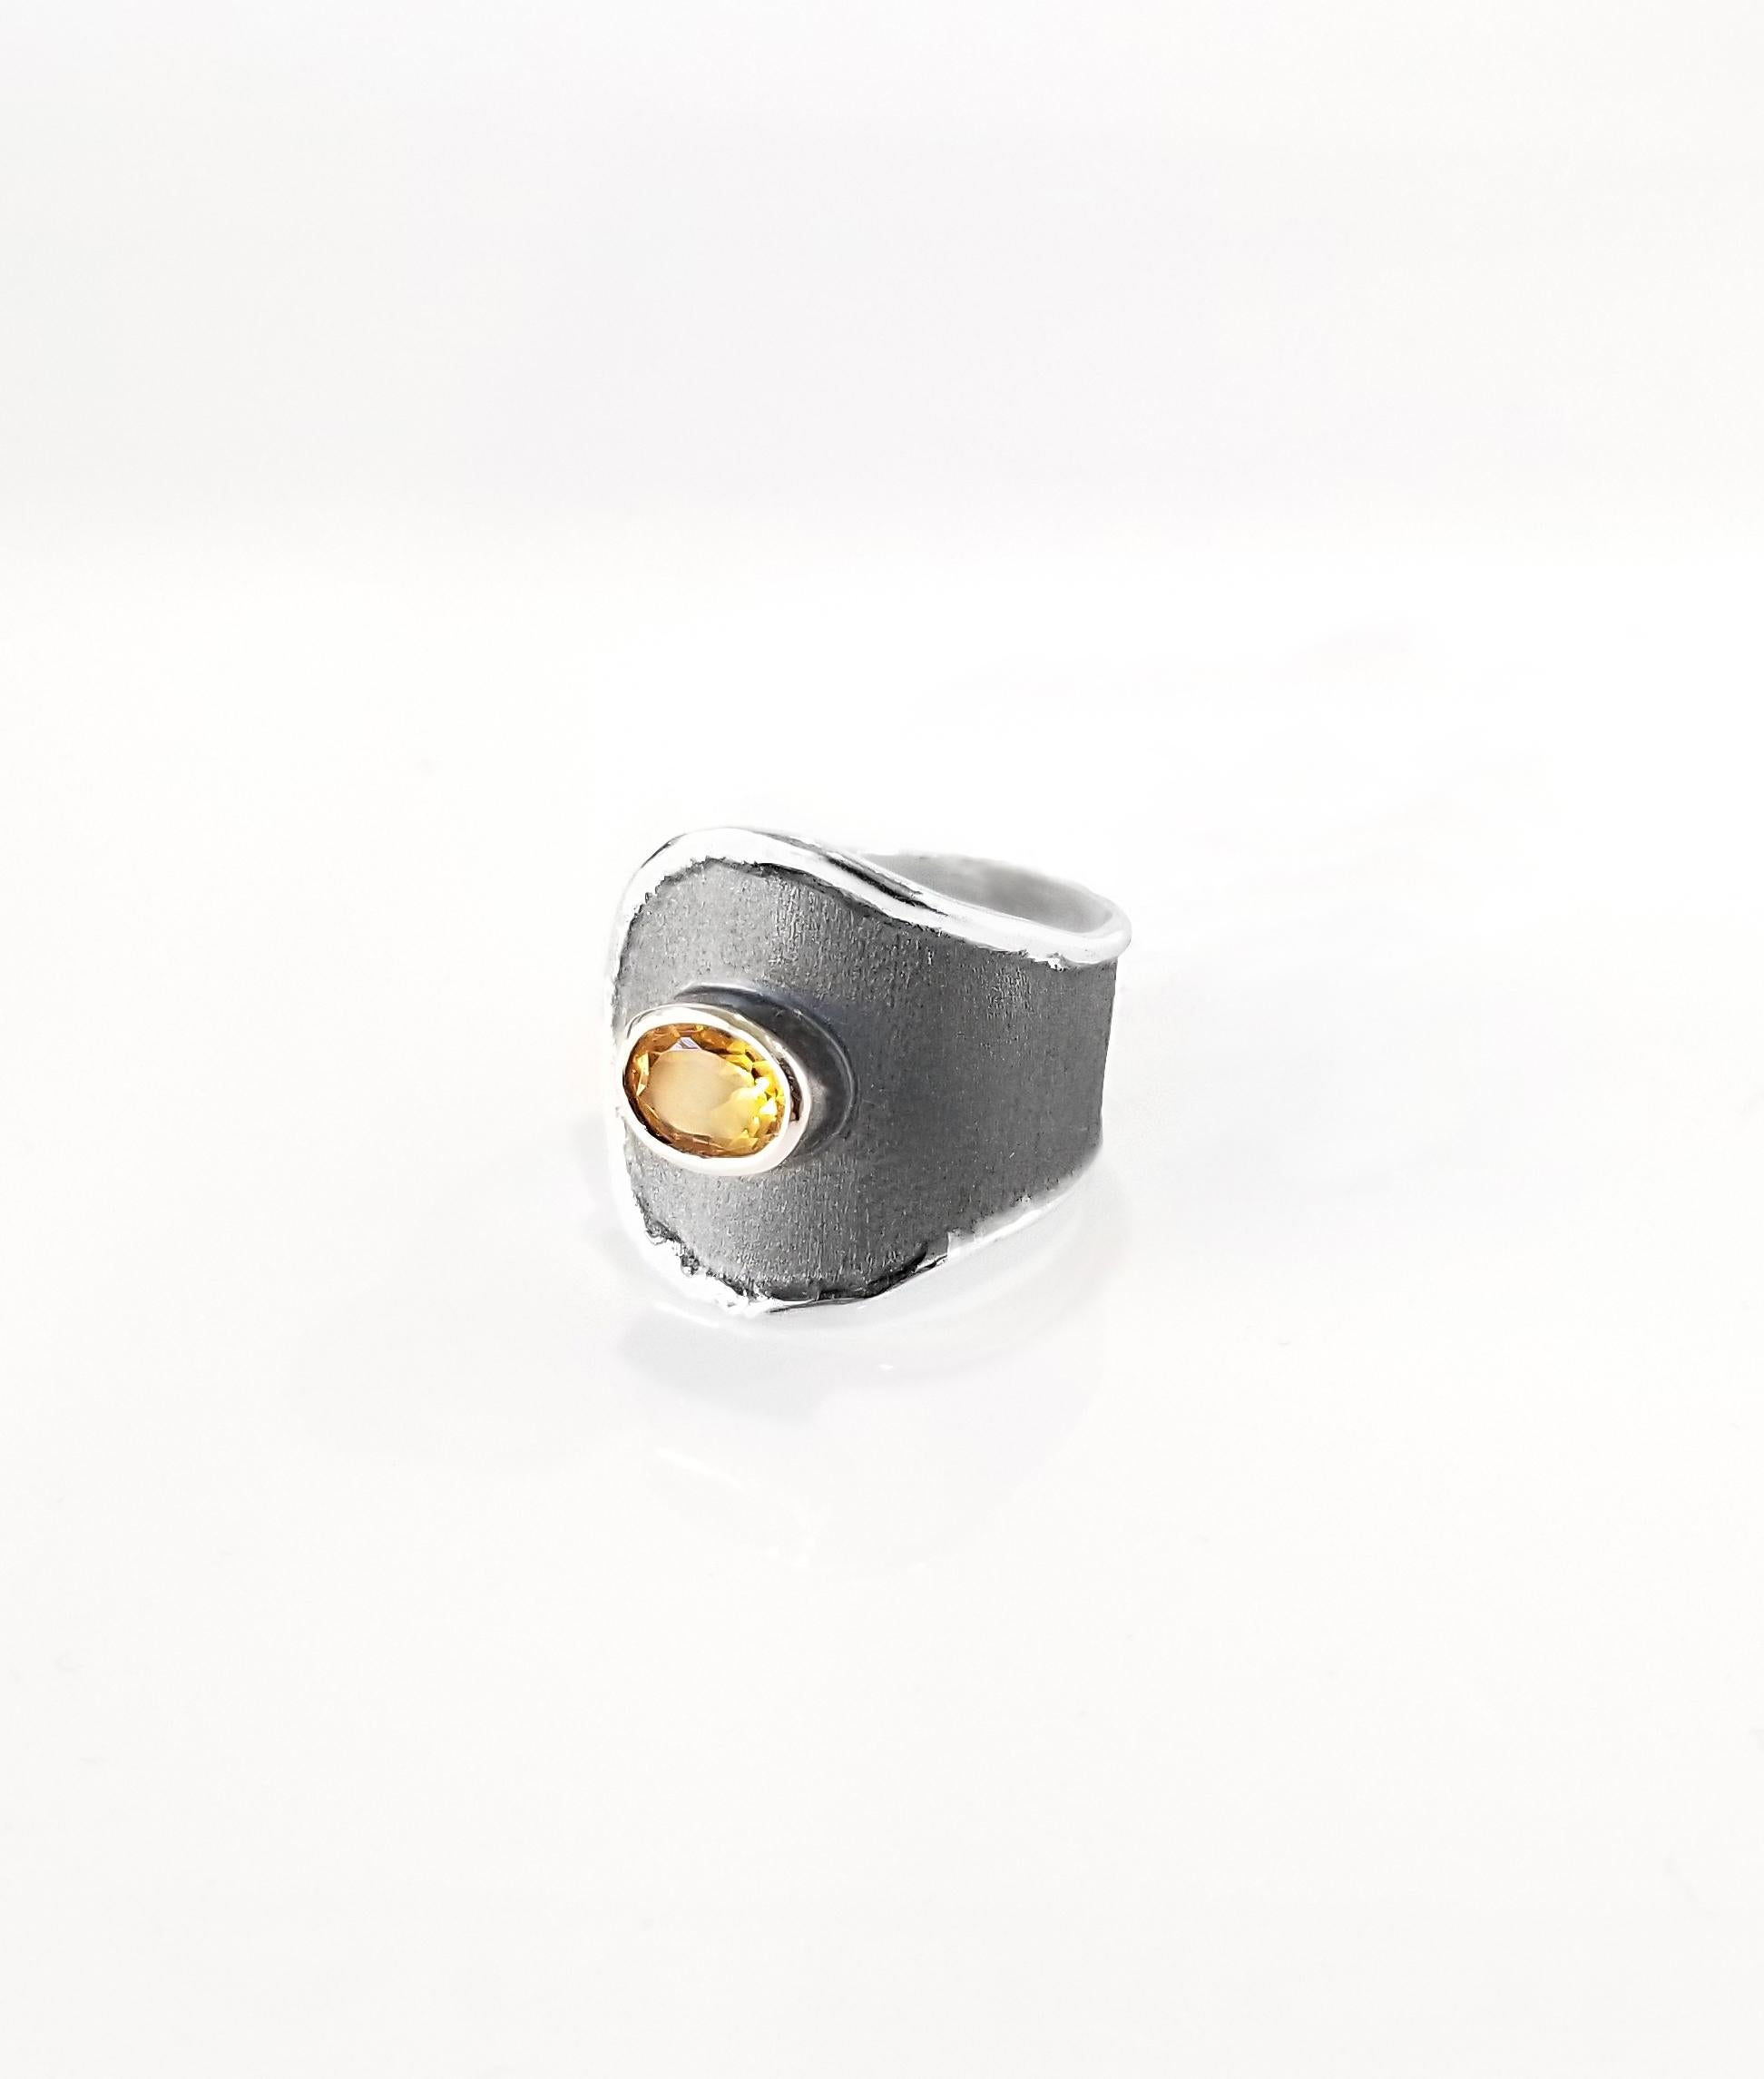 Yianni Creations Hephestos Collection 100% Handmade Artisan Ring from Fine Silver. The ring features 1.25 Carat Citrine and unique oxidized Rhodium background, complemented by unique techniques of craftsmanship - brushed texture and nature-inspired